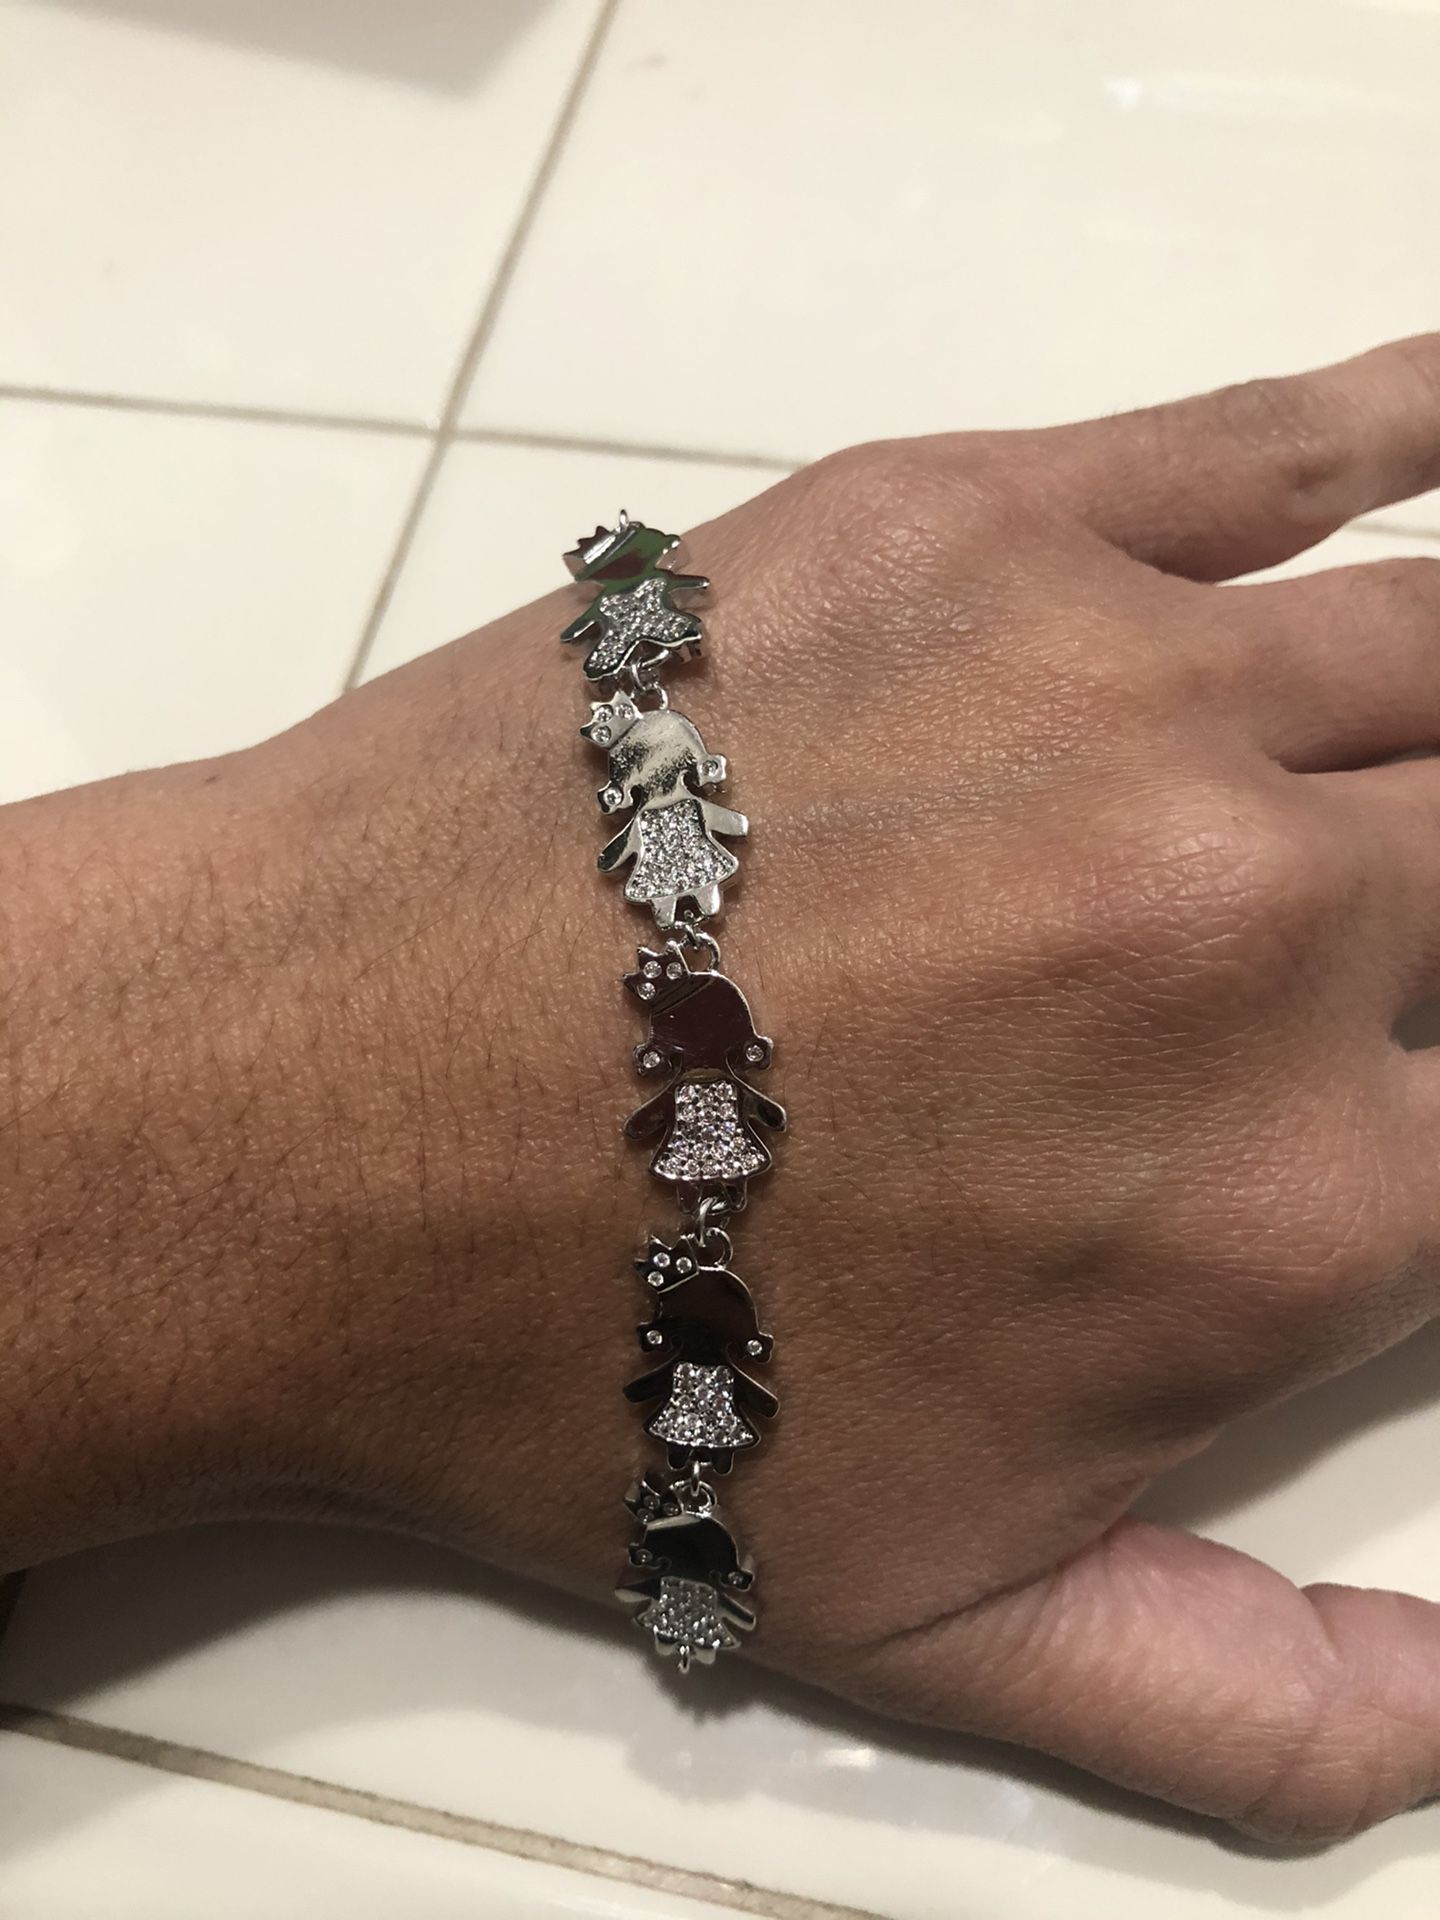 Bracelet with 5 charms